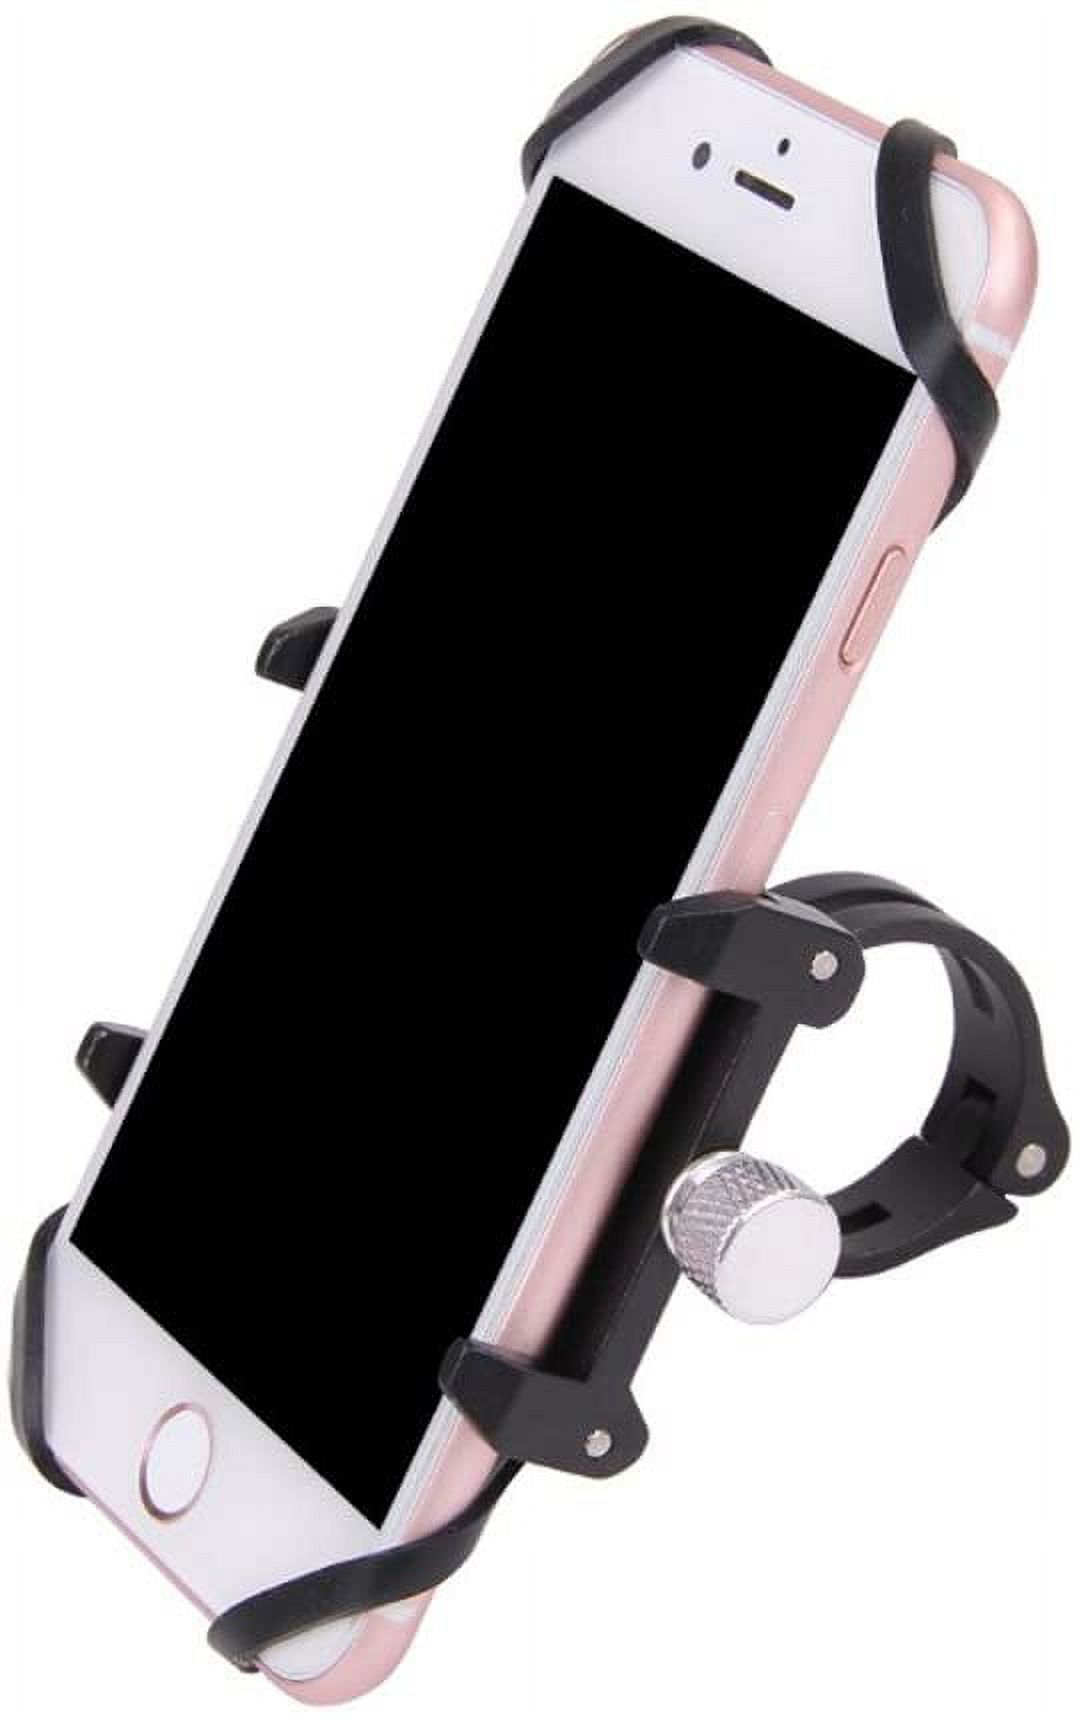 GUB Mountian Bike Phone Mount - Universal Adjustable Bike Mount Cell Phone GPS Mount Holder Rotating Cradle Clamp with Silicone Band for Mountain Bike Motorbike,iPhone Samsung (Black with Band) - image 3 of 7